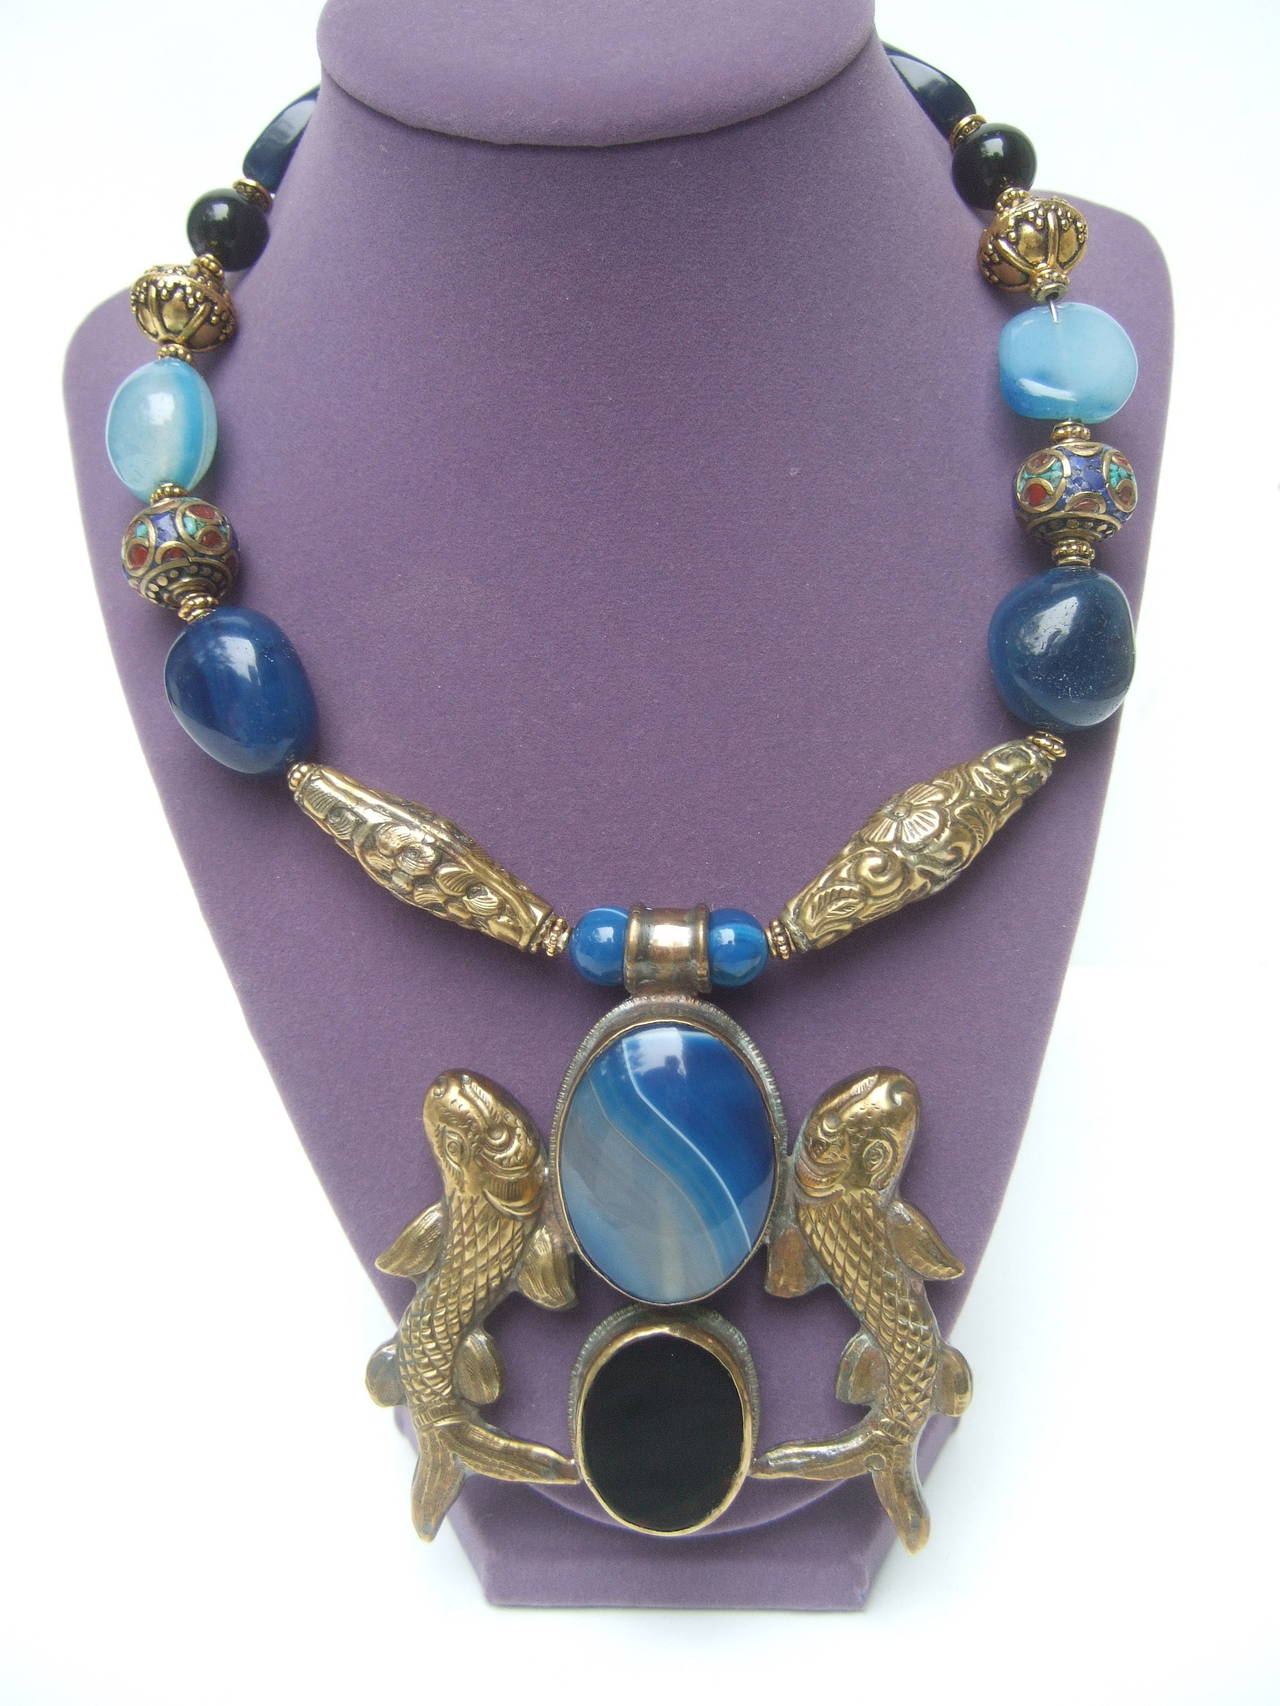 Exotic artisan Nepalese glass stone choker necklace c 1980s
The unique handmade necklace is designed with a 
pair of large brass metal fish. The fish pendant is 
adorned with a large blue agate oval shaped cabochon

Under the large blue agate